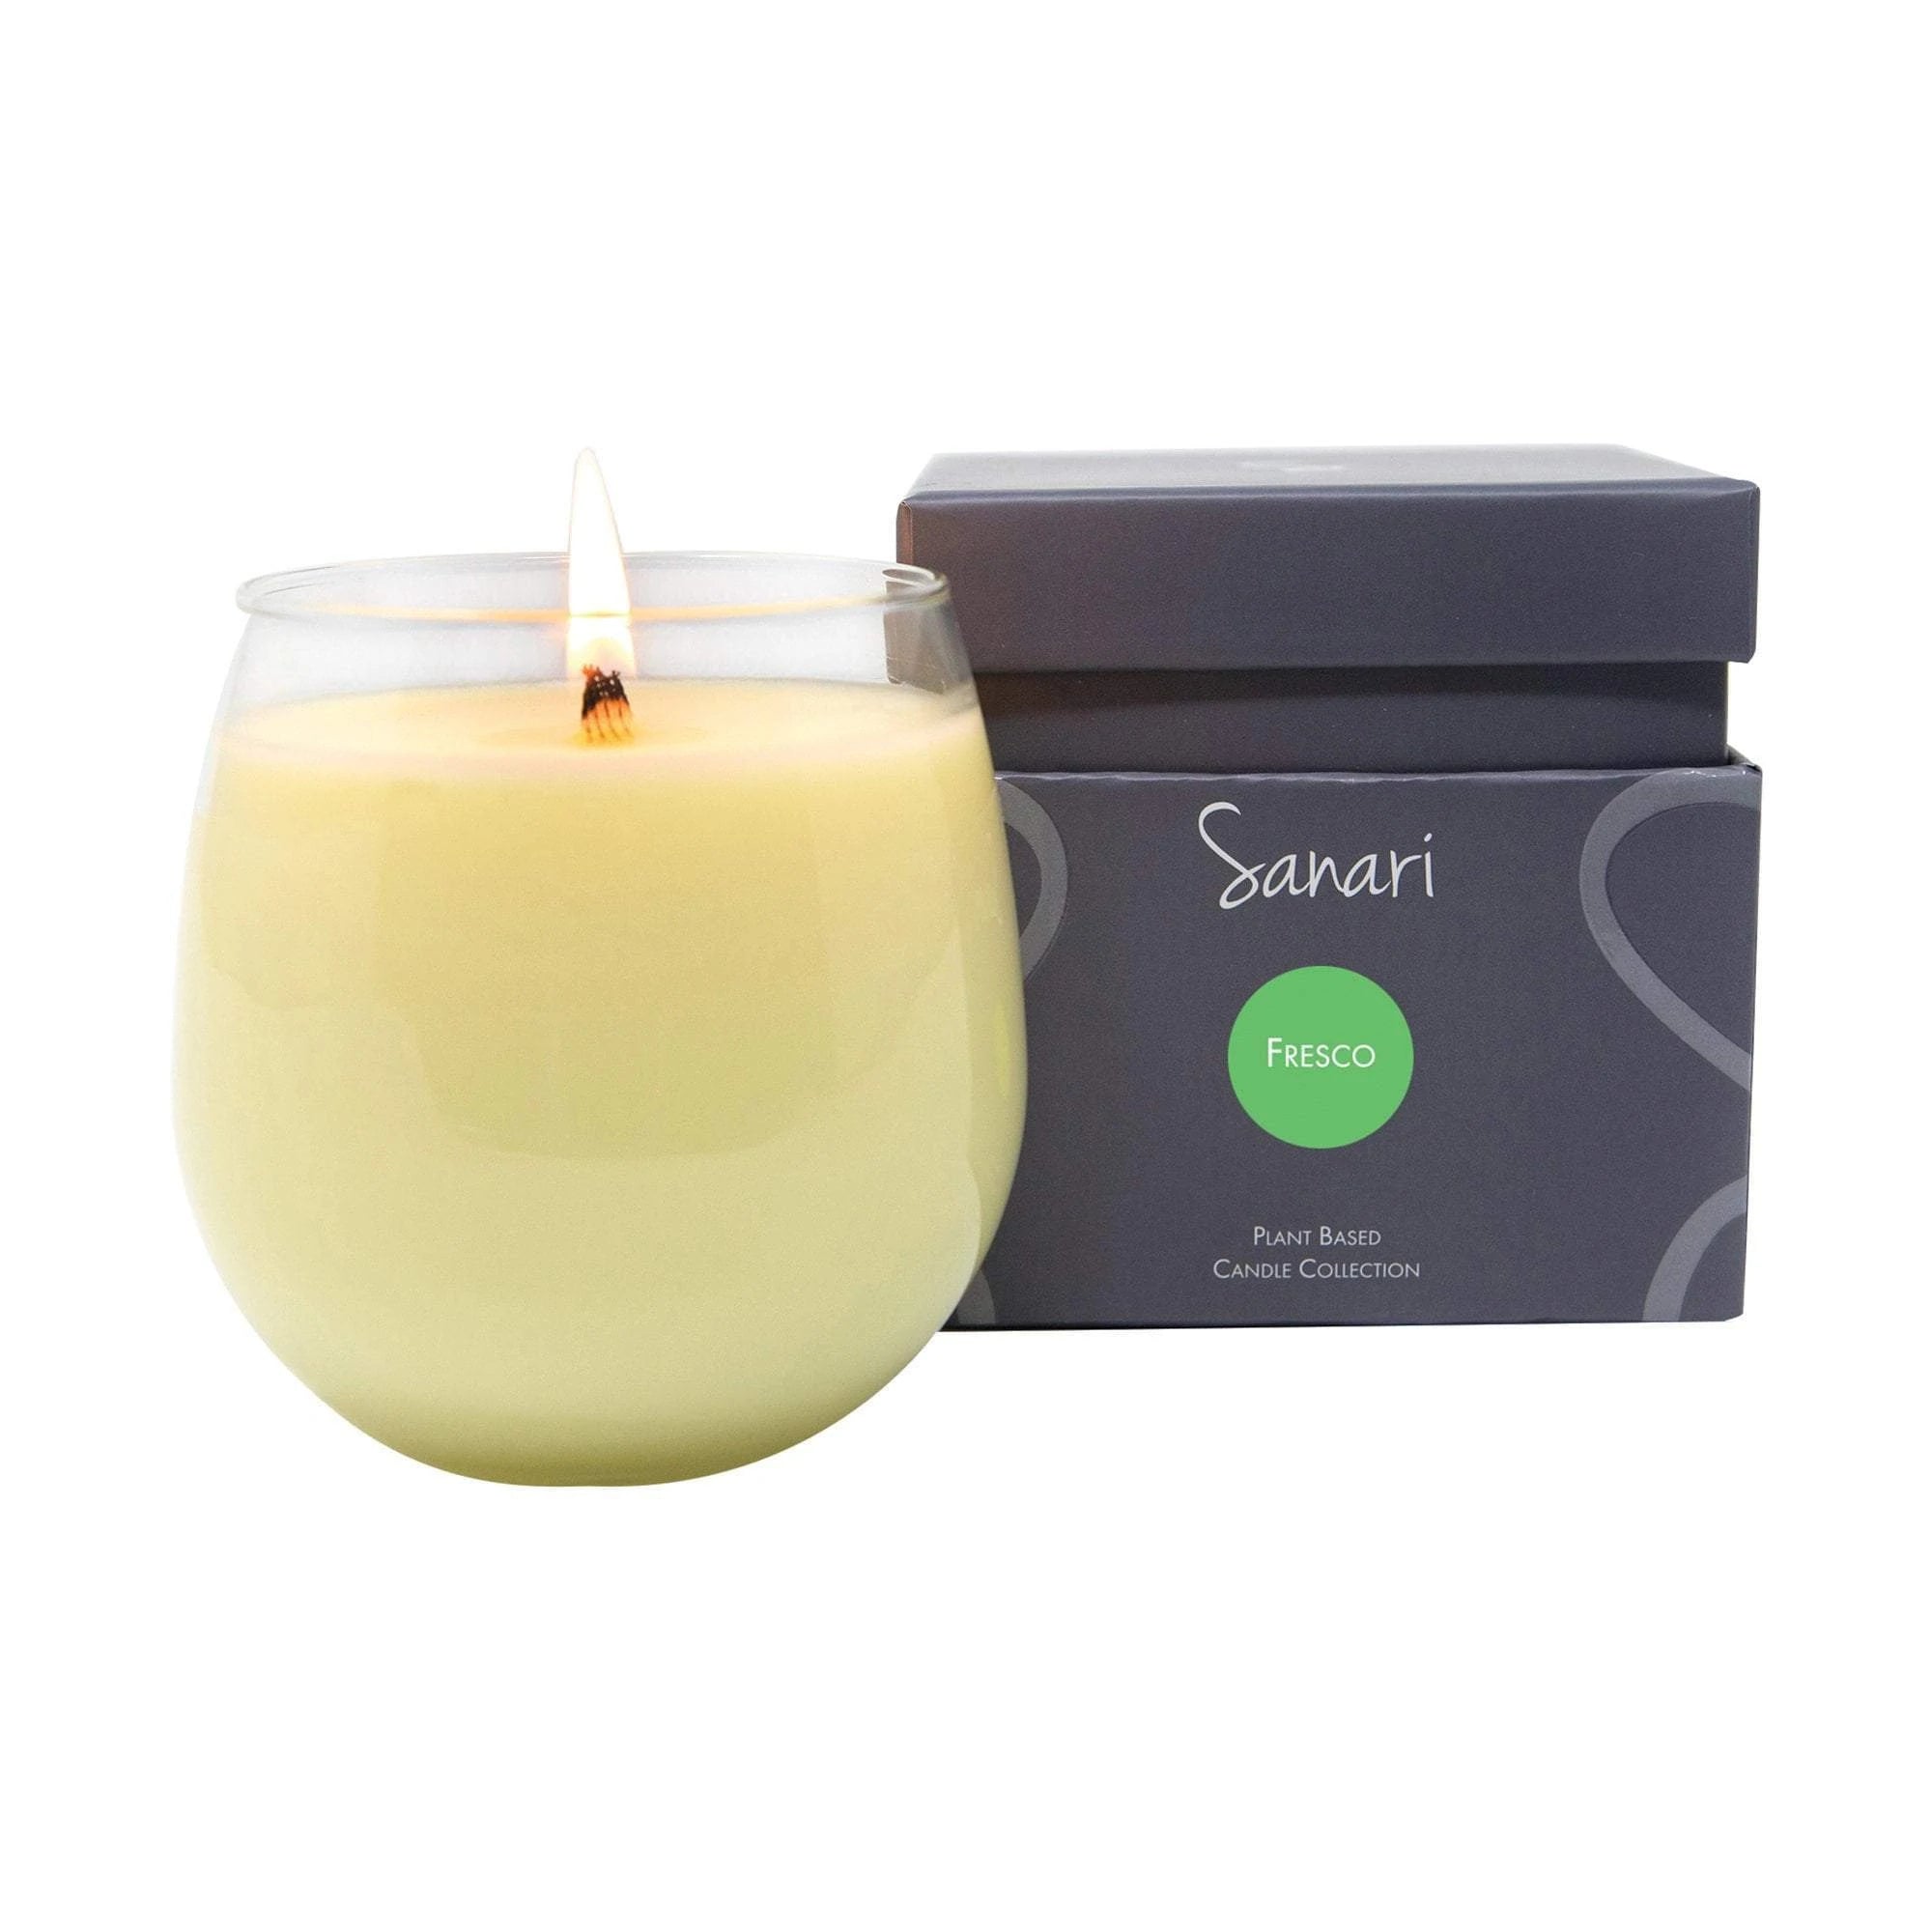 "Fresco" Scented 16oz Coconut Wax Candle I Lifestyle Details